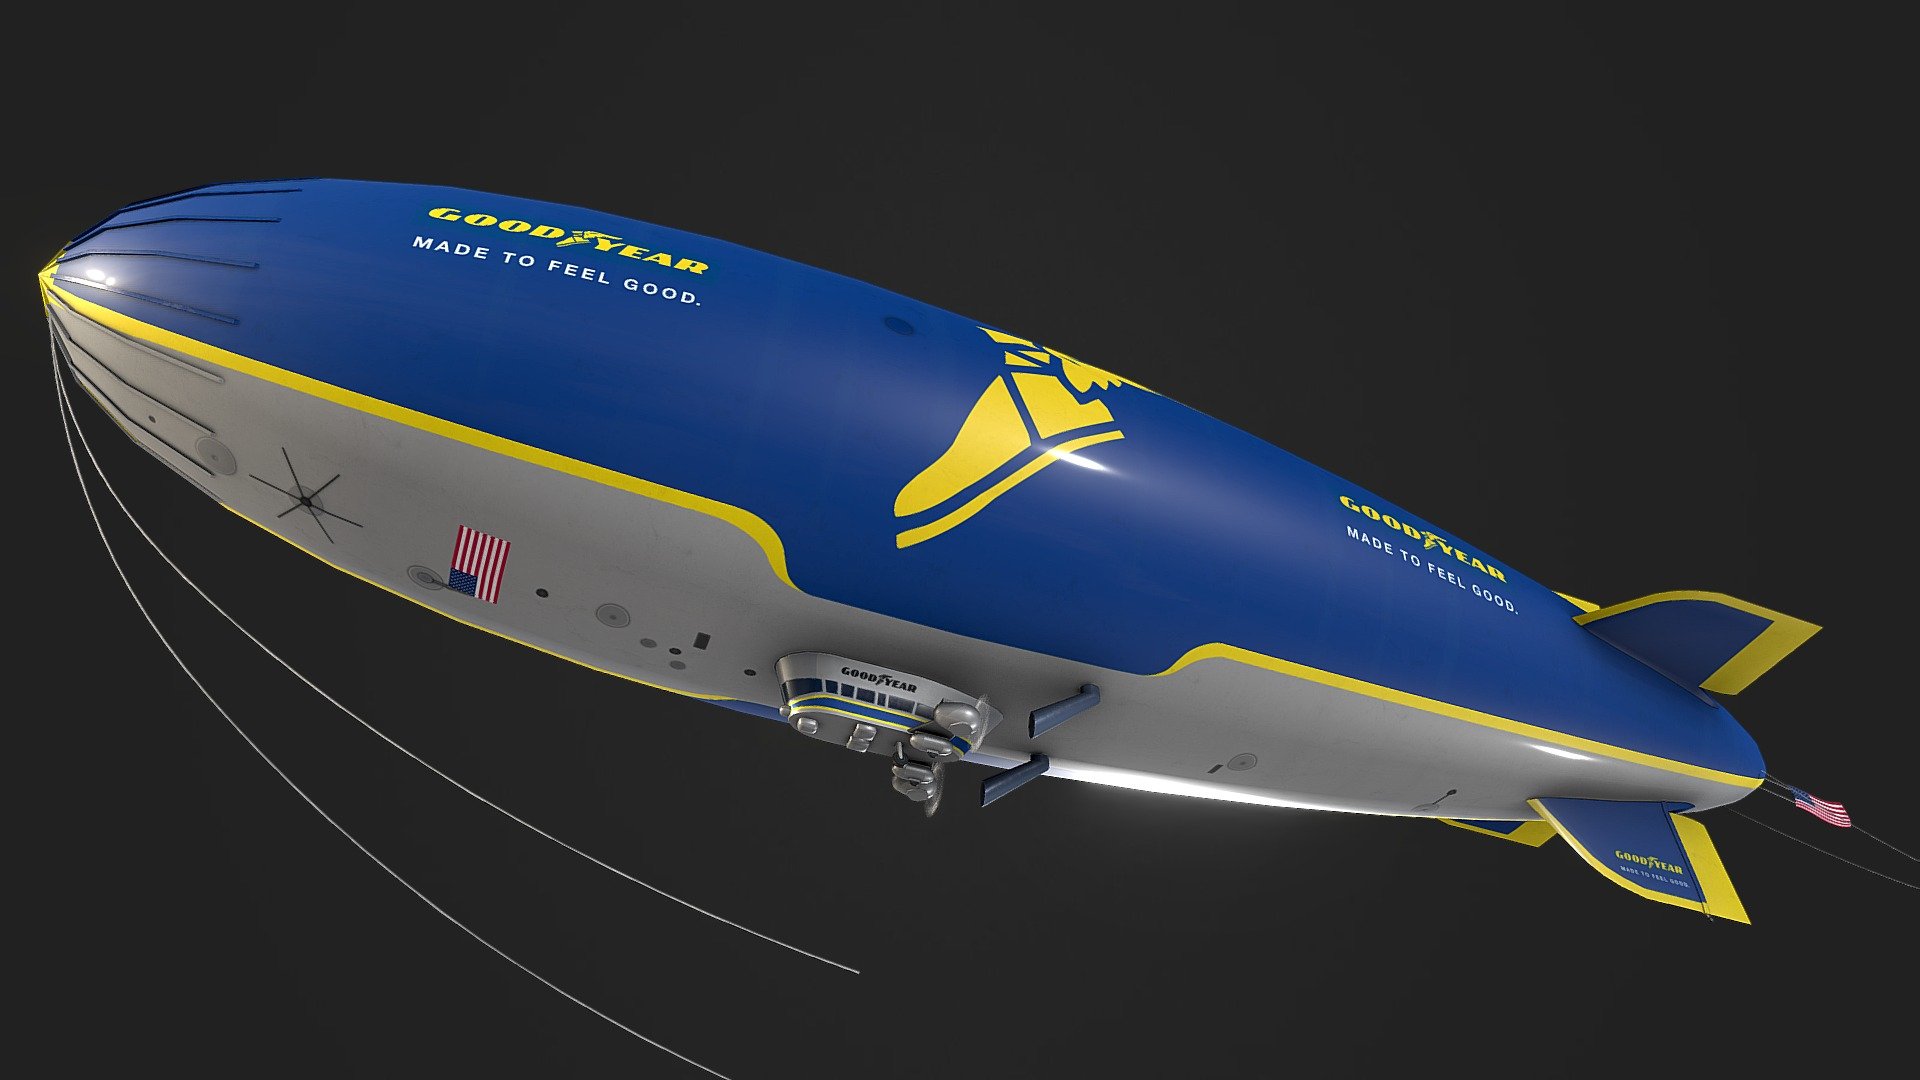 Realtime optimized, low poly airship blimp with a Goodyear livery. Mesh has a triangle count of 4020 tris. Included are 12 x both PBR workflows ready textures in native 4096x4096 px. Propellers got textures with a 512x512 px resolution. Included are 2 animated model versions with 180 frames @ 30 fps. FBX export contains pure rotation based animations, that work best with the Sketchfab viewer. The 3dsMax file archive contains also an extended animated version with modifiers and a static model version. View the complete Low Poly Airship Blimp collection: https://skfb.ly/oRPVV - Low Poly Airship Blimp - Goodyear 2 Livery - Buy Royalty Free 3D model by cgamp 3d model